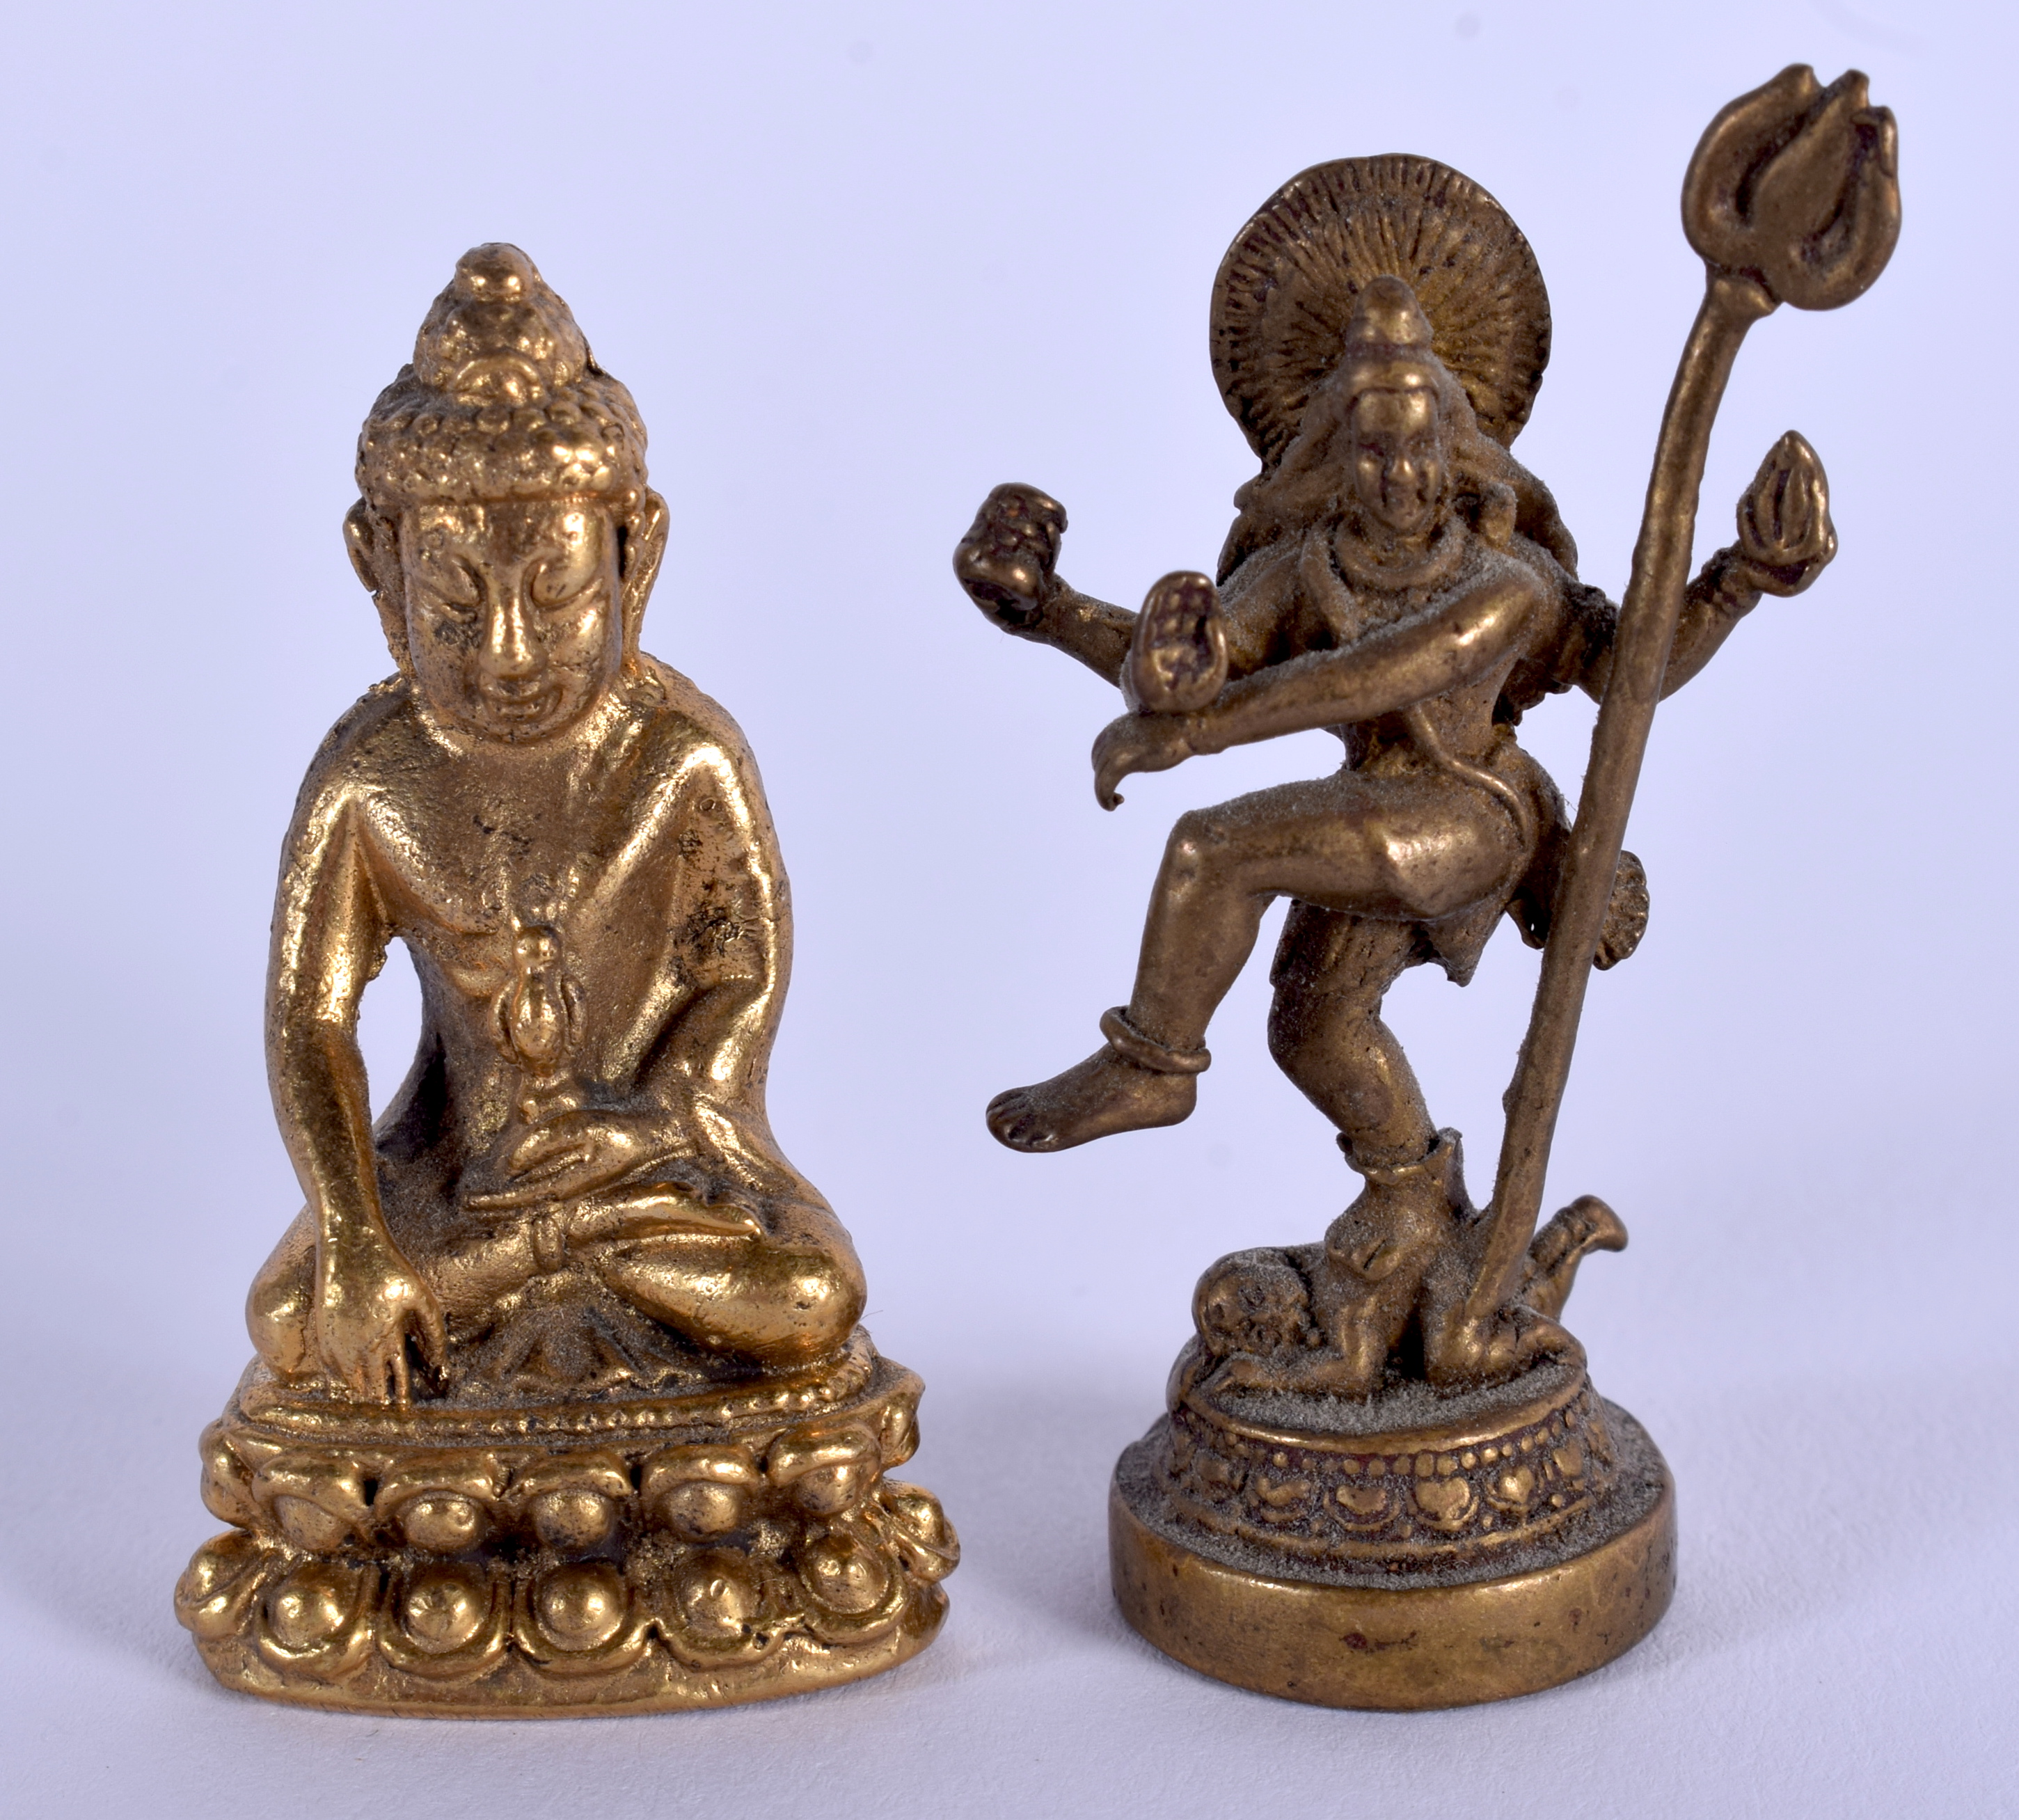 AN EARLY 20TH CENTURY SINO TIBETAN BRONZE BUDDHA together with another similar. Largest 3.5 cm high.